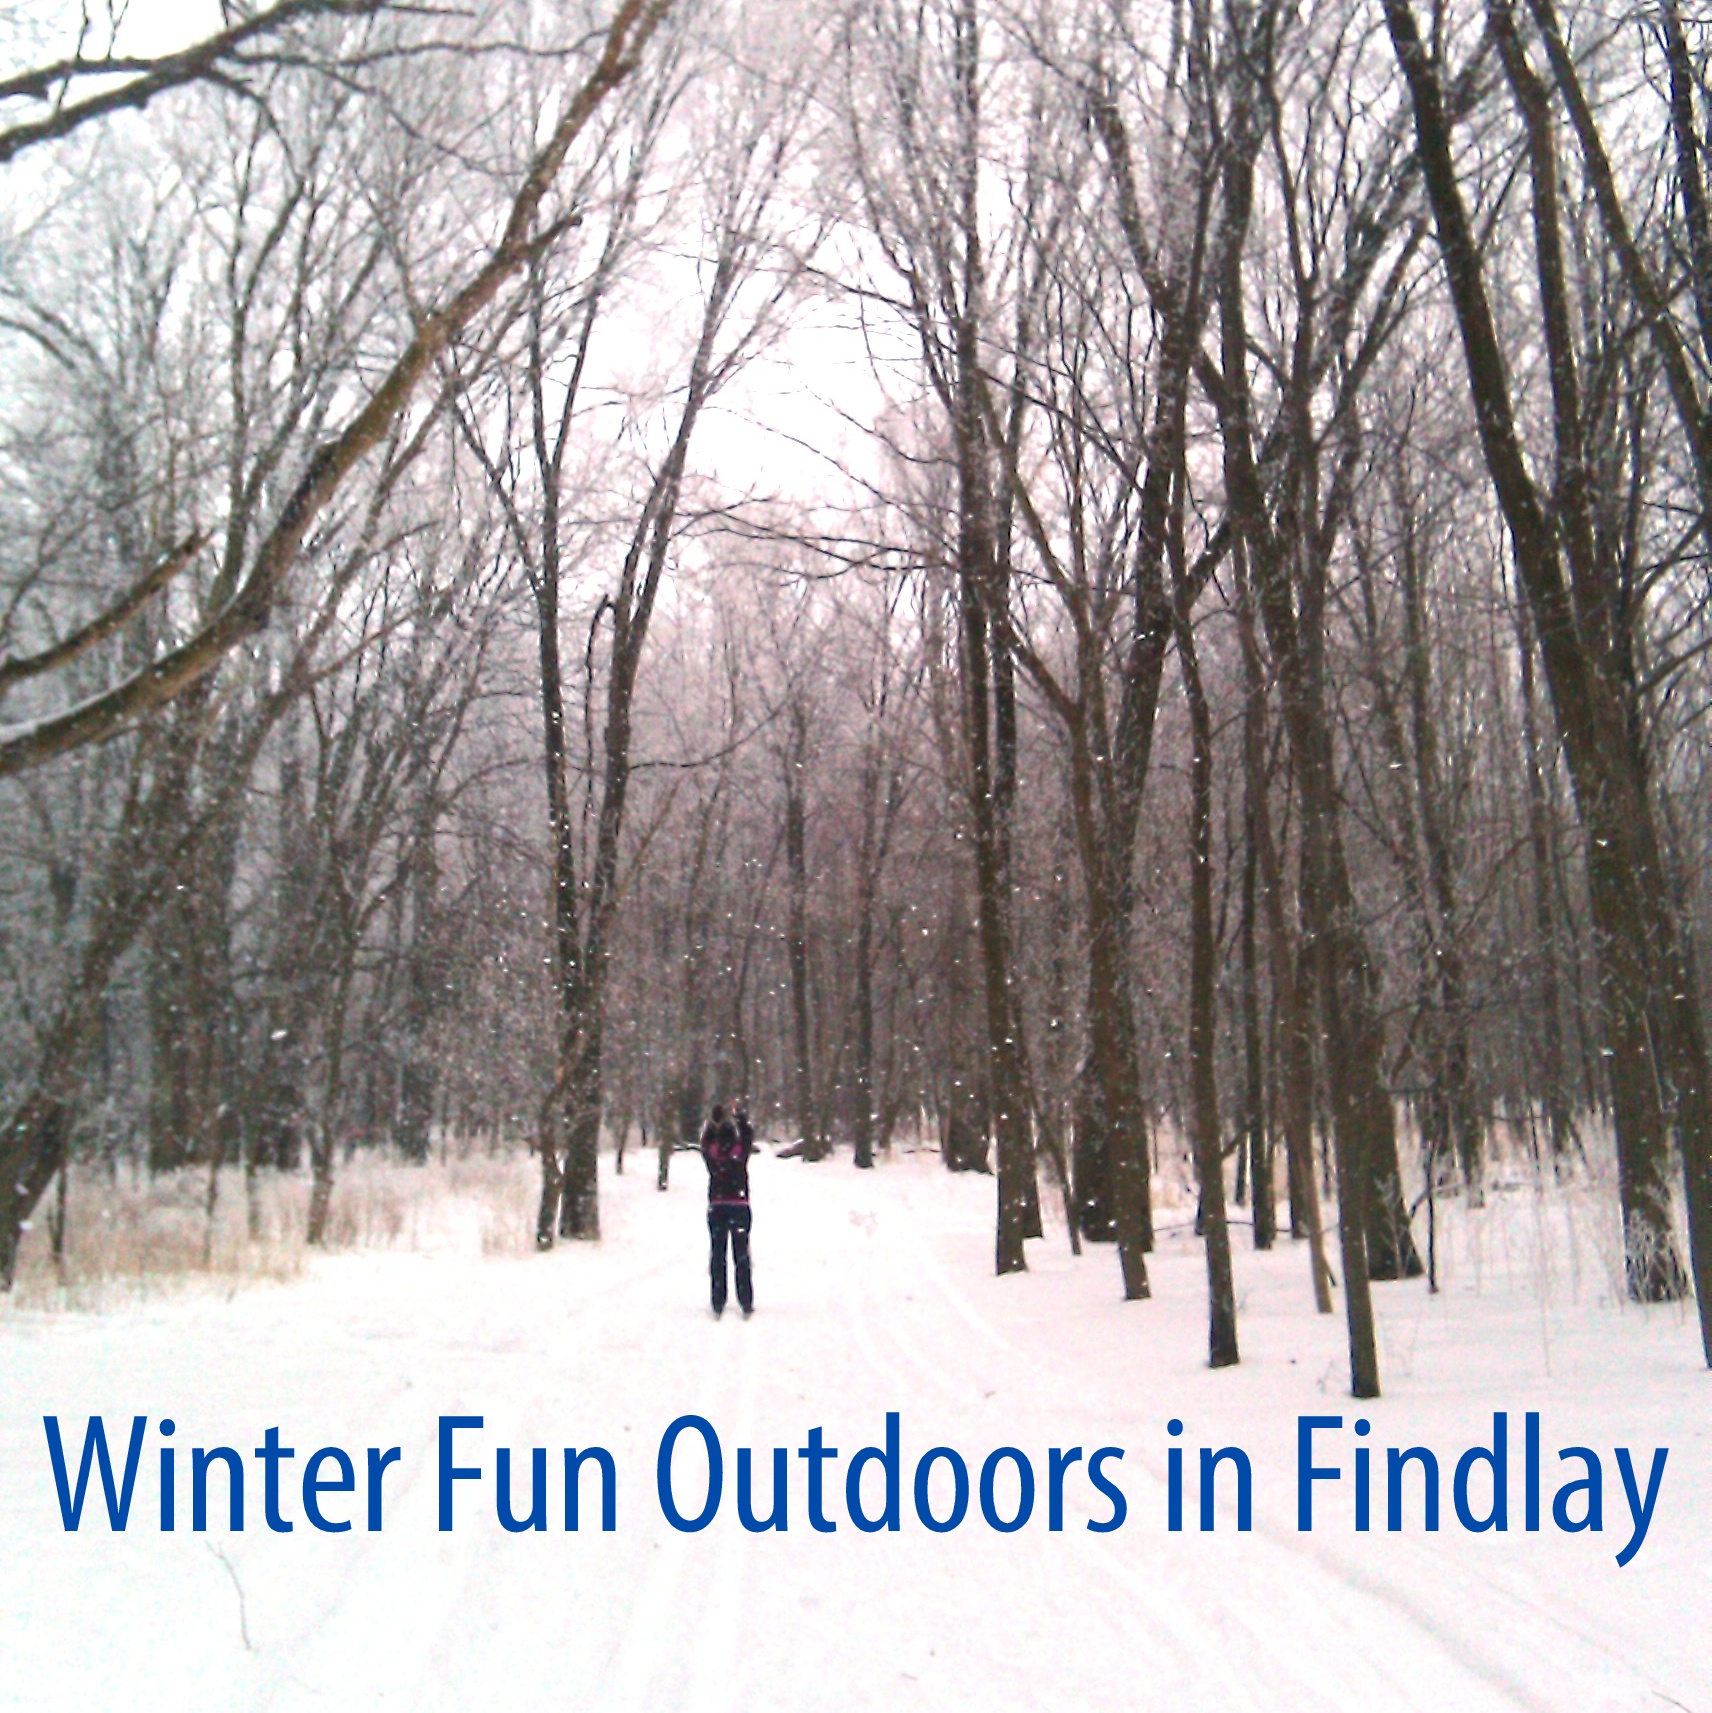 Winter doesn't mean you need to stay indoors, get out and enjoy all that Findlay and Hancock County has to offer - even in the cold! • VisitFindlay.com